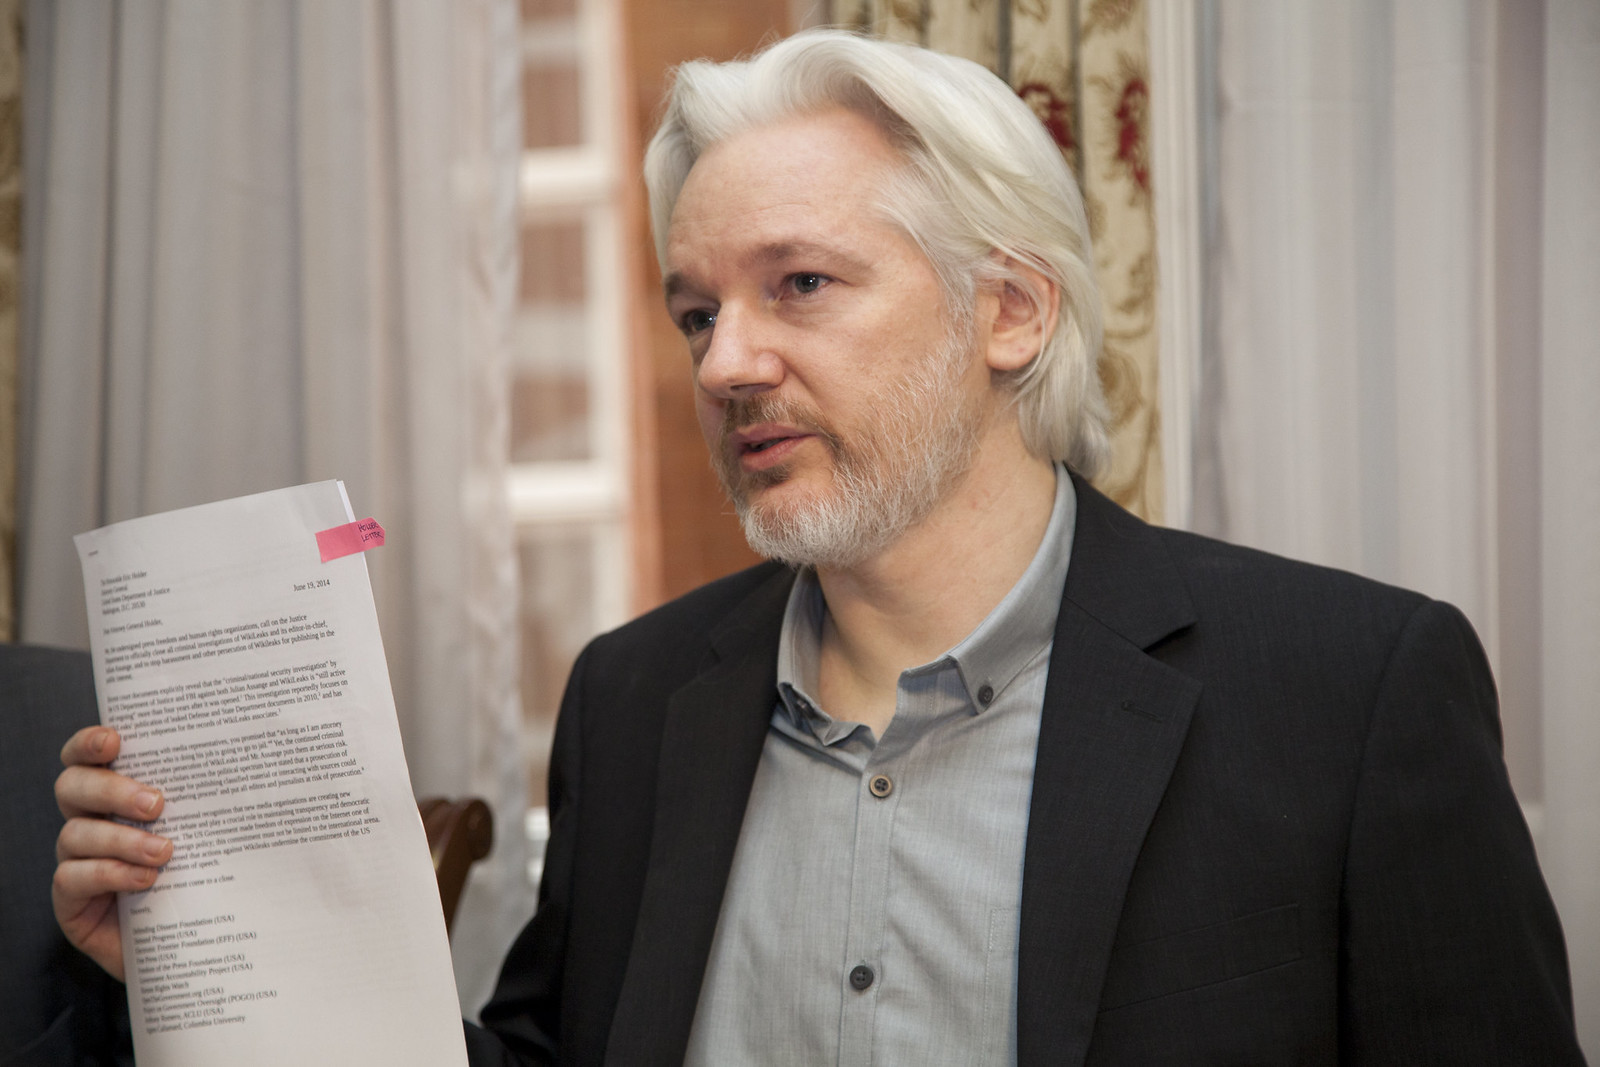 UK approves WikiLeaks founder Julian Assange’s extradition to U.S.